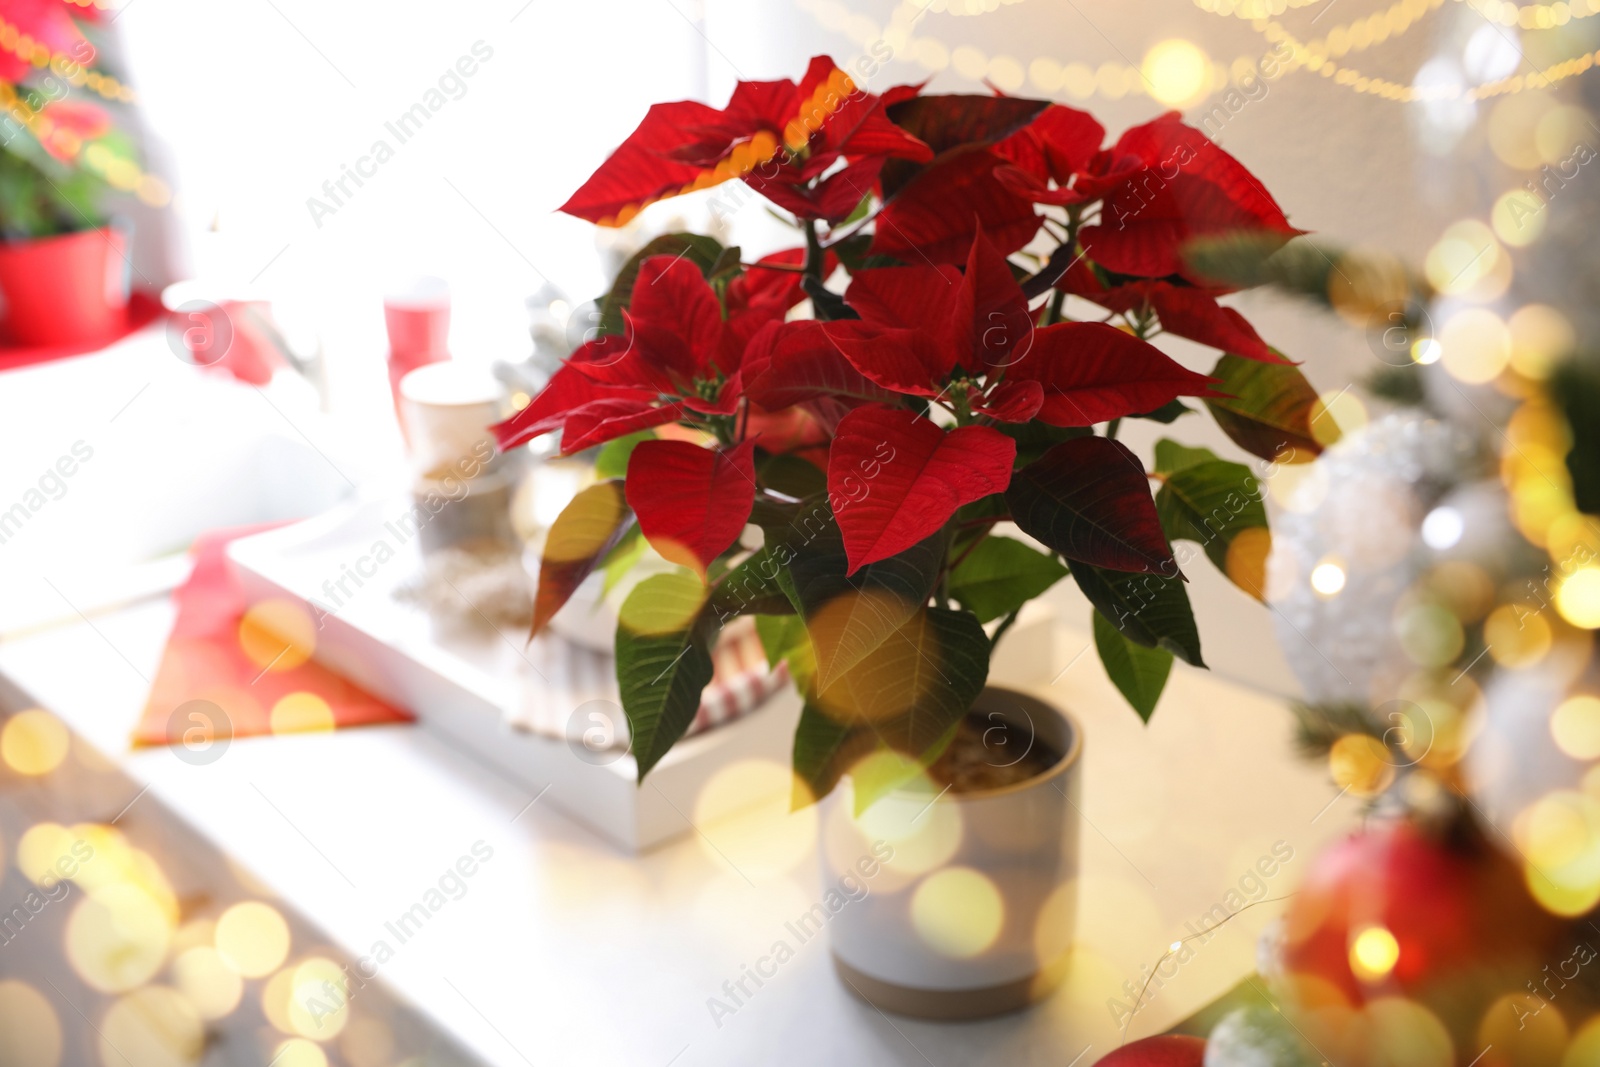 Image of Traditional Christmas poinsettia flower on white table, bokeh effect